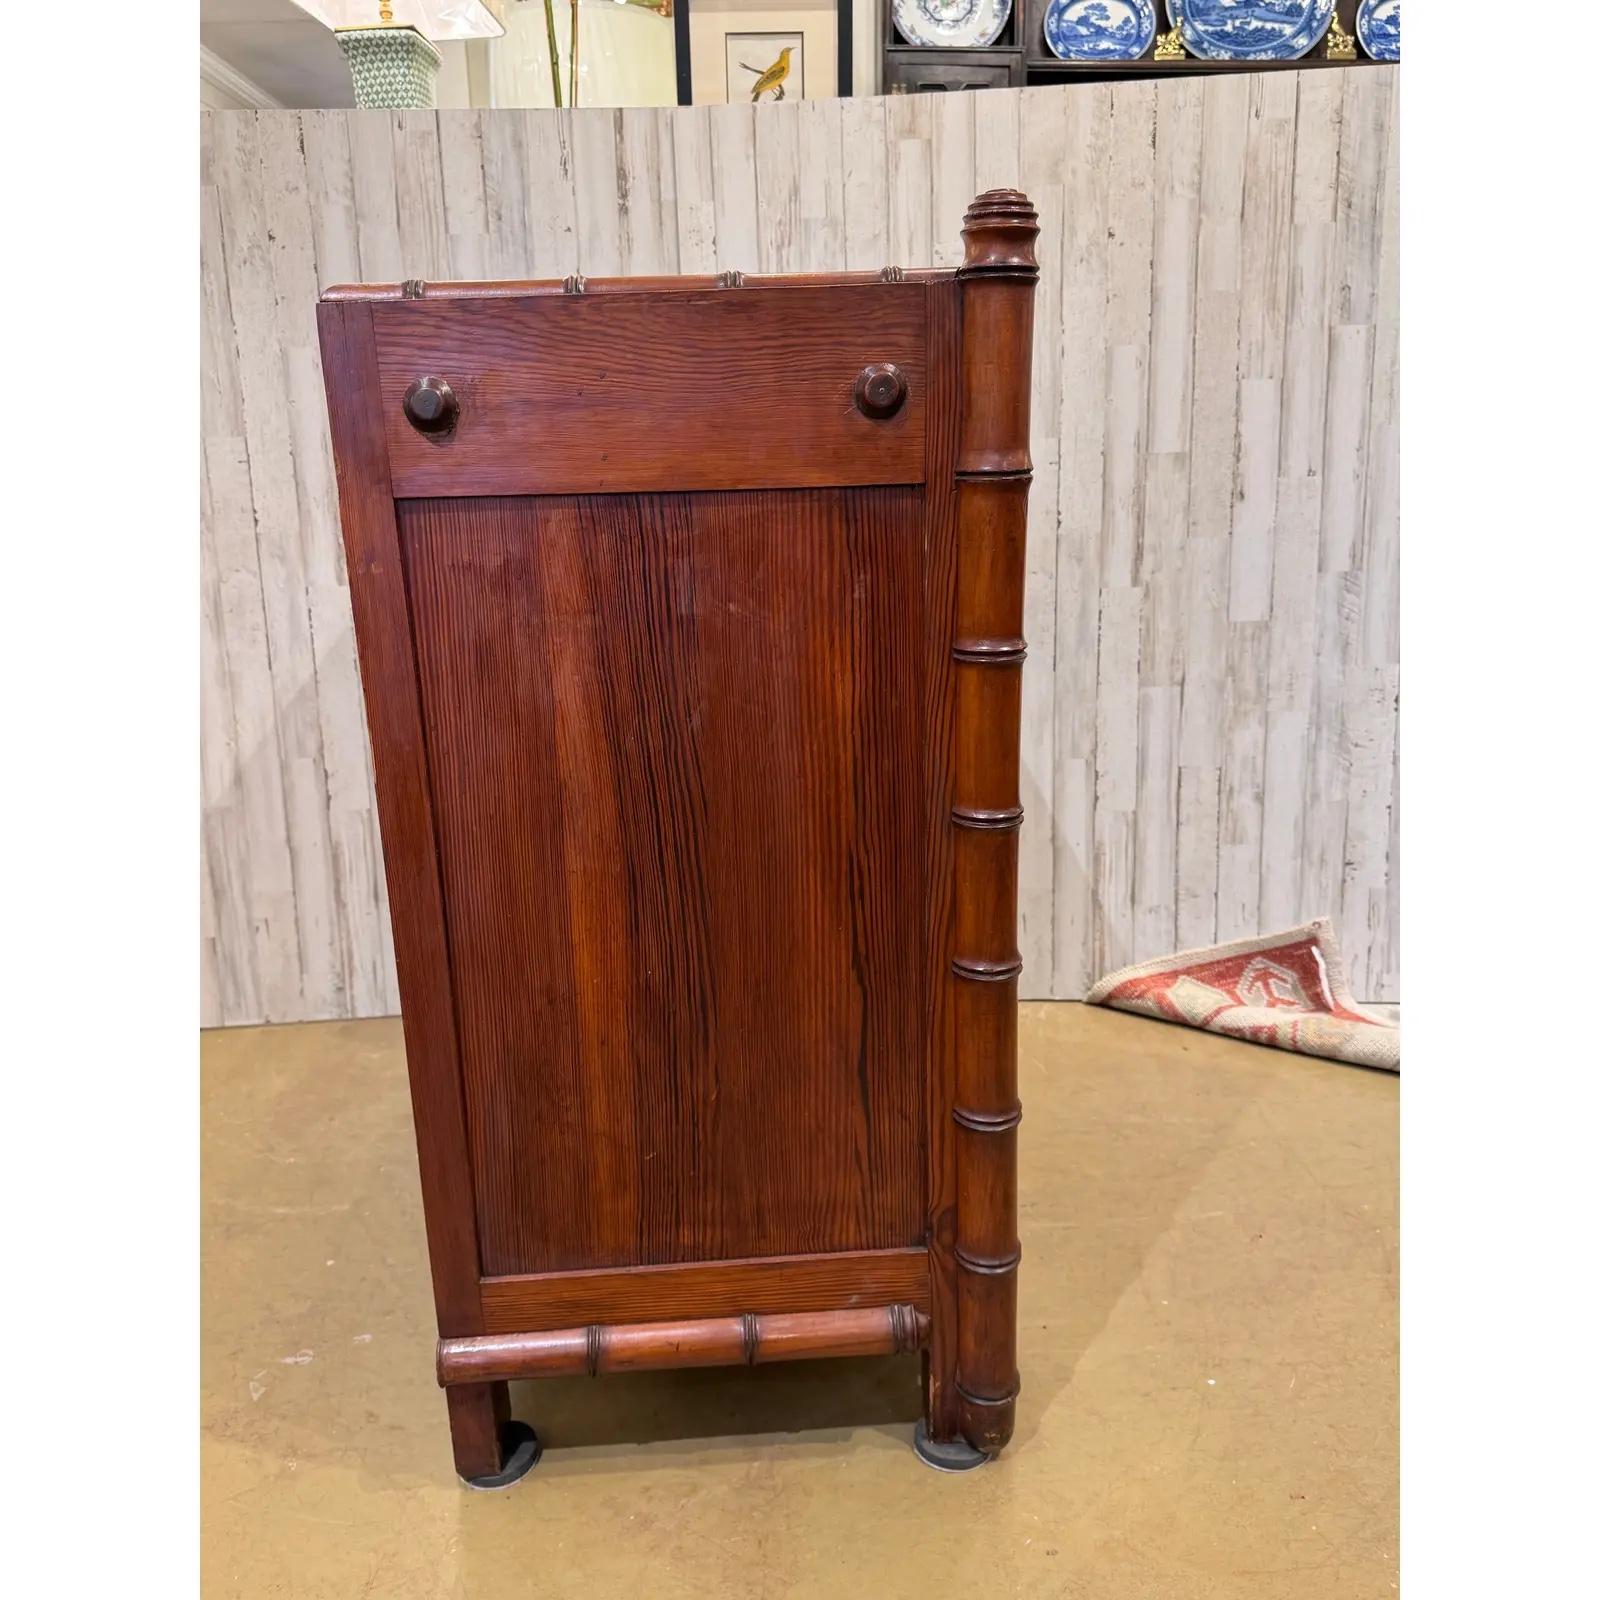 This is a beautiful faux bamboo vanity chest of drawers! Of French make, this piece has all the typical charm of that style. Lovely glow and patina in the wood, and the hand carved diamond detailing on the drawers and the carved bamboo